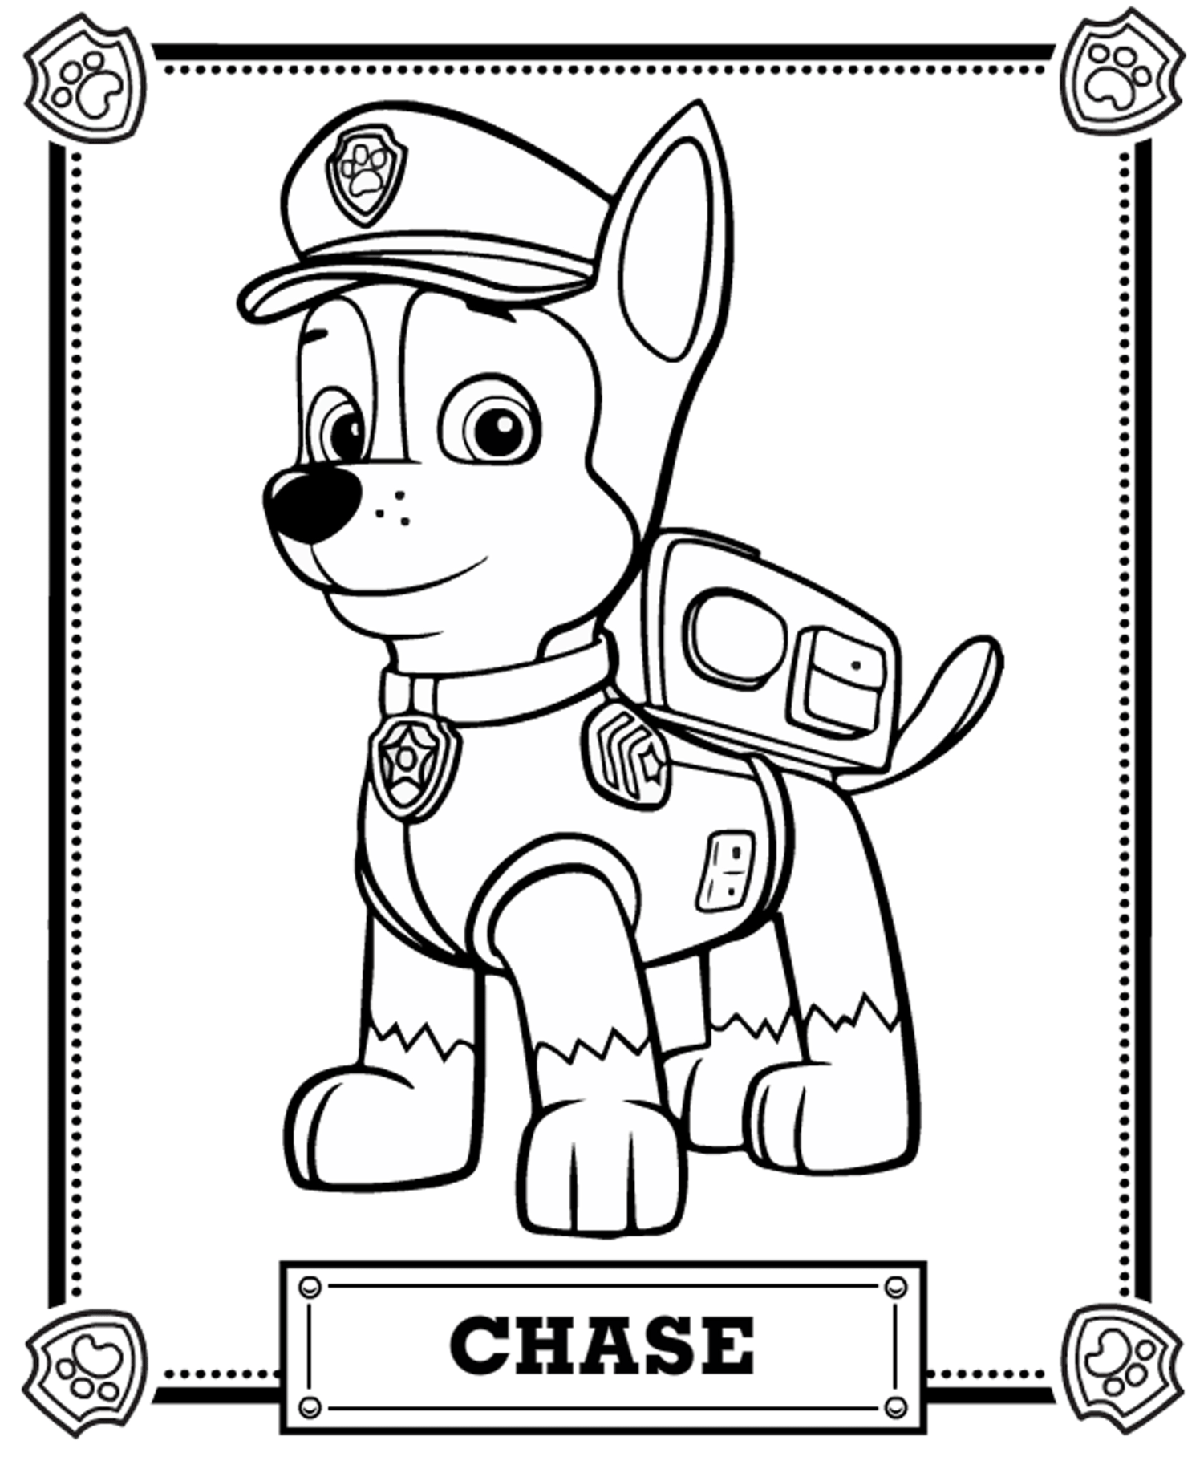 PAW Patrol Coloring Pages - GetColoringPages.com